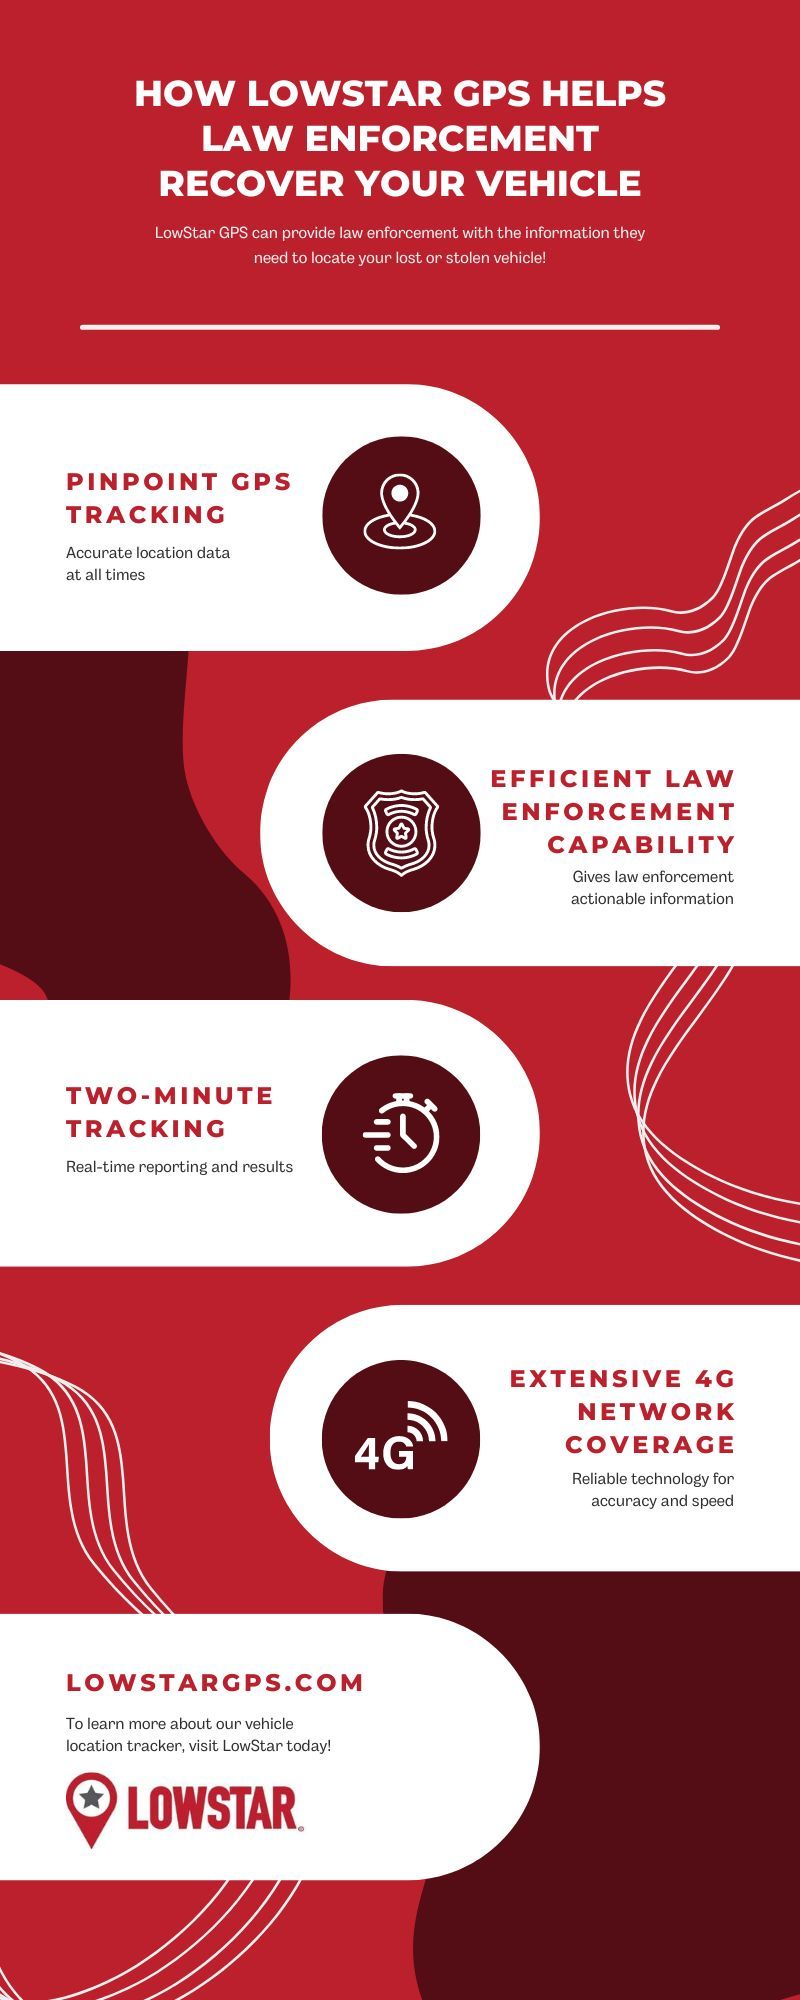 M36699 - How LowStar GPS Helps Law Enforcement Recover Your Vehicle - Information Design Infographic.jpg